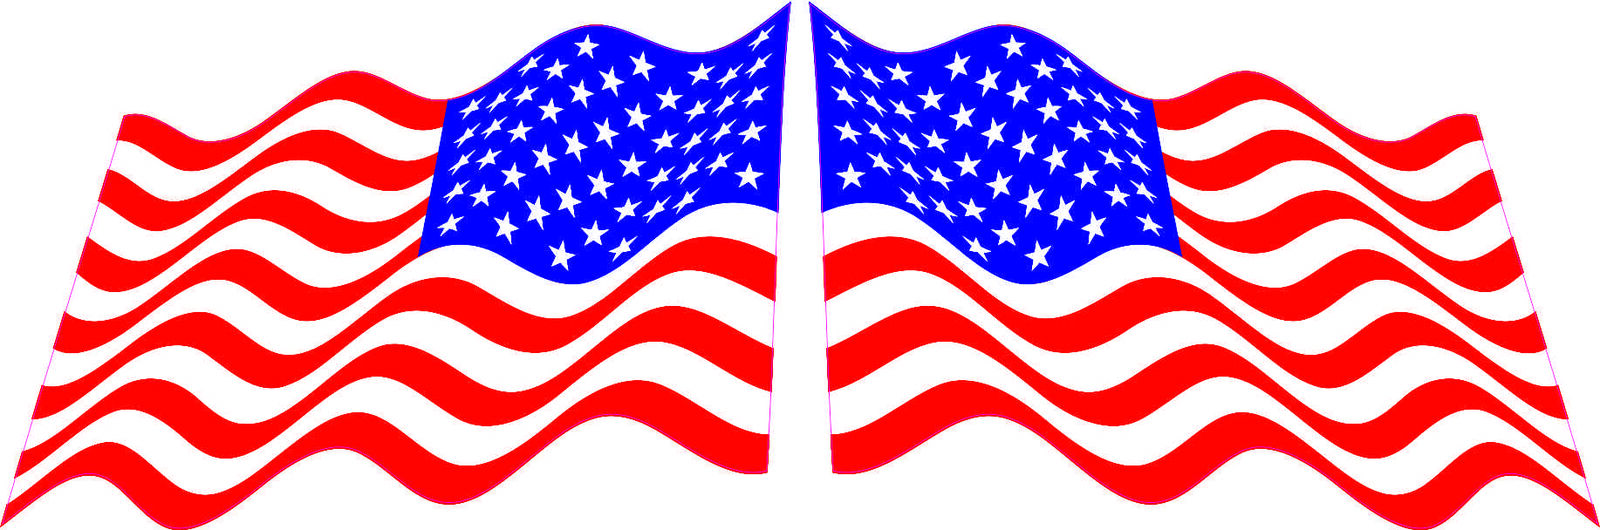 3in x 2in Mirrored Waving American Flag Stickers Car Truck Vehicle Bumper Decal